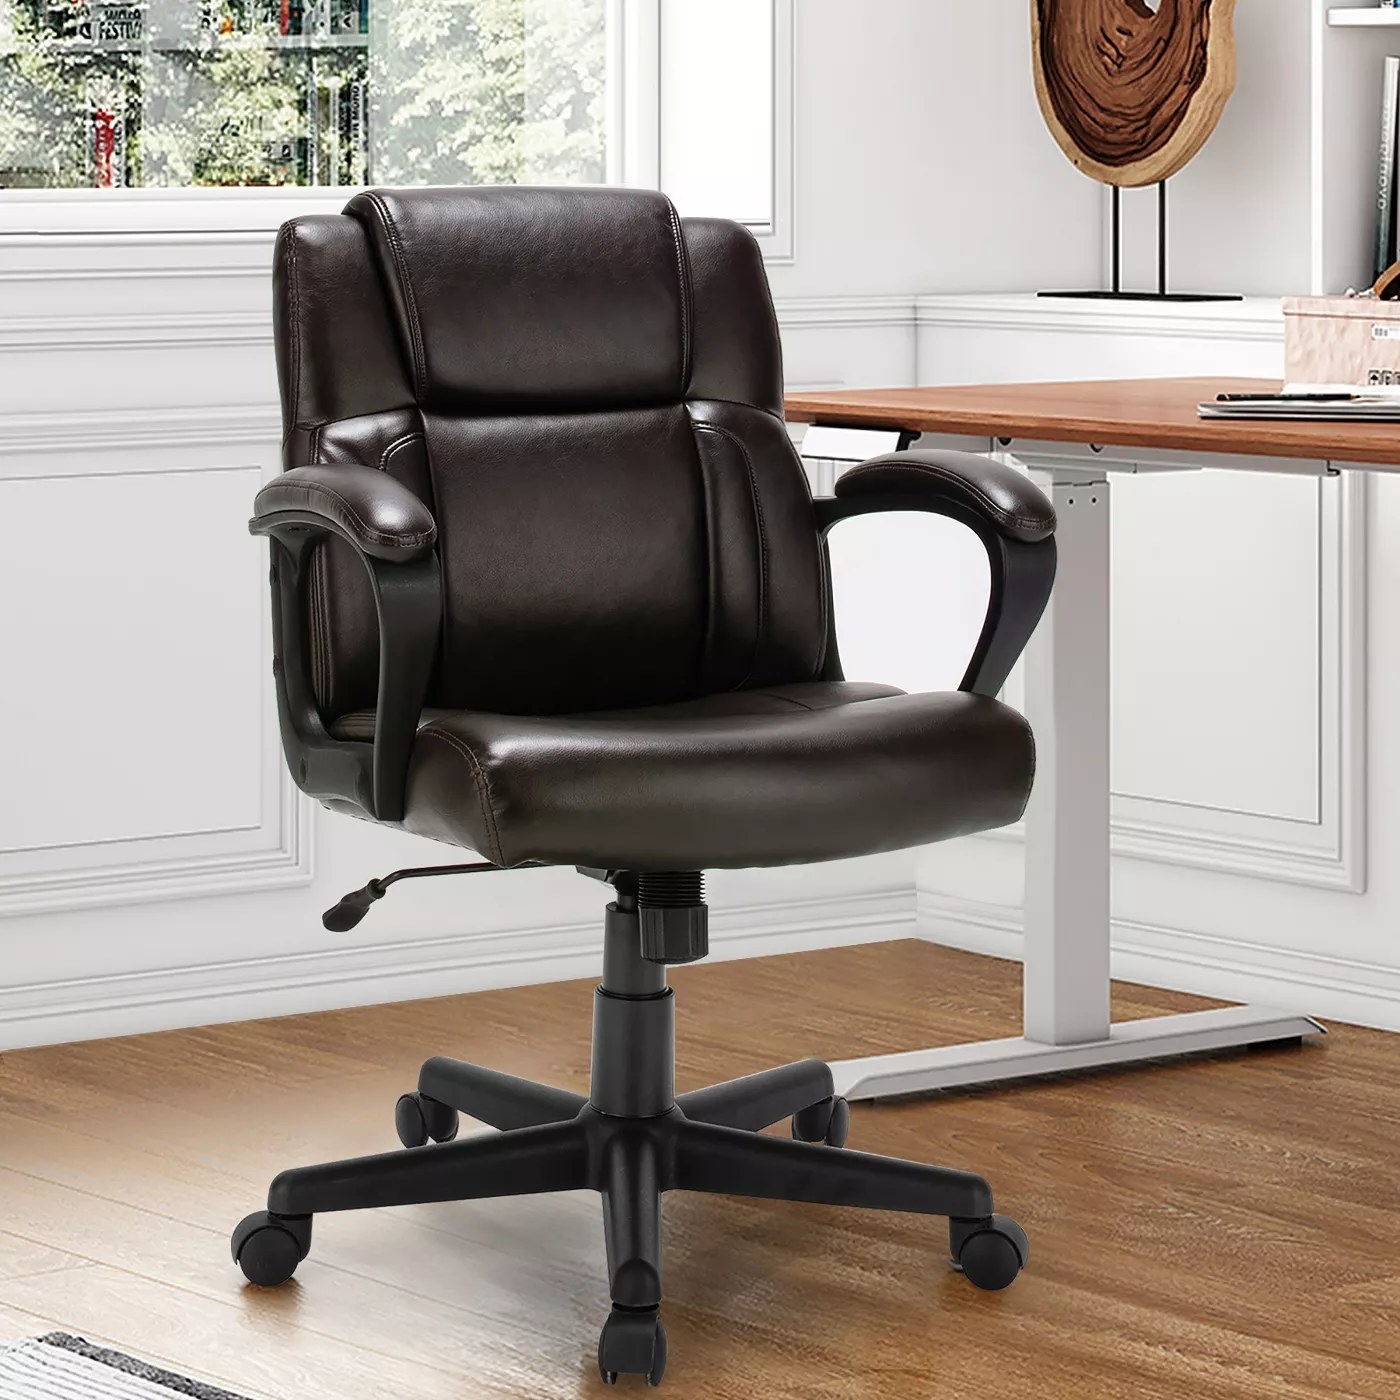 The black office chair